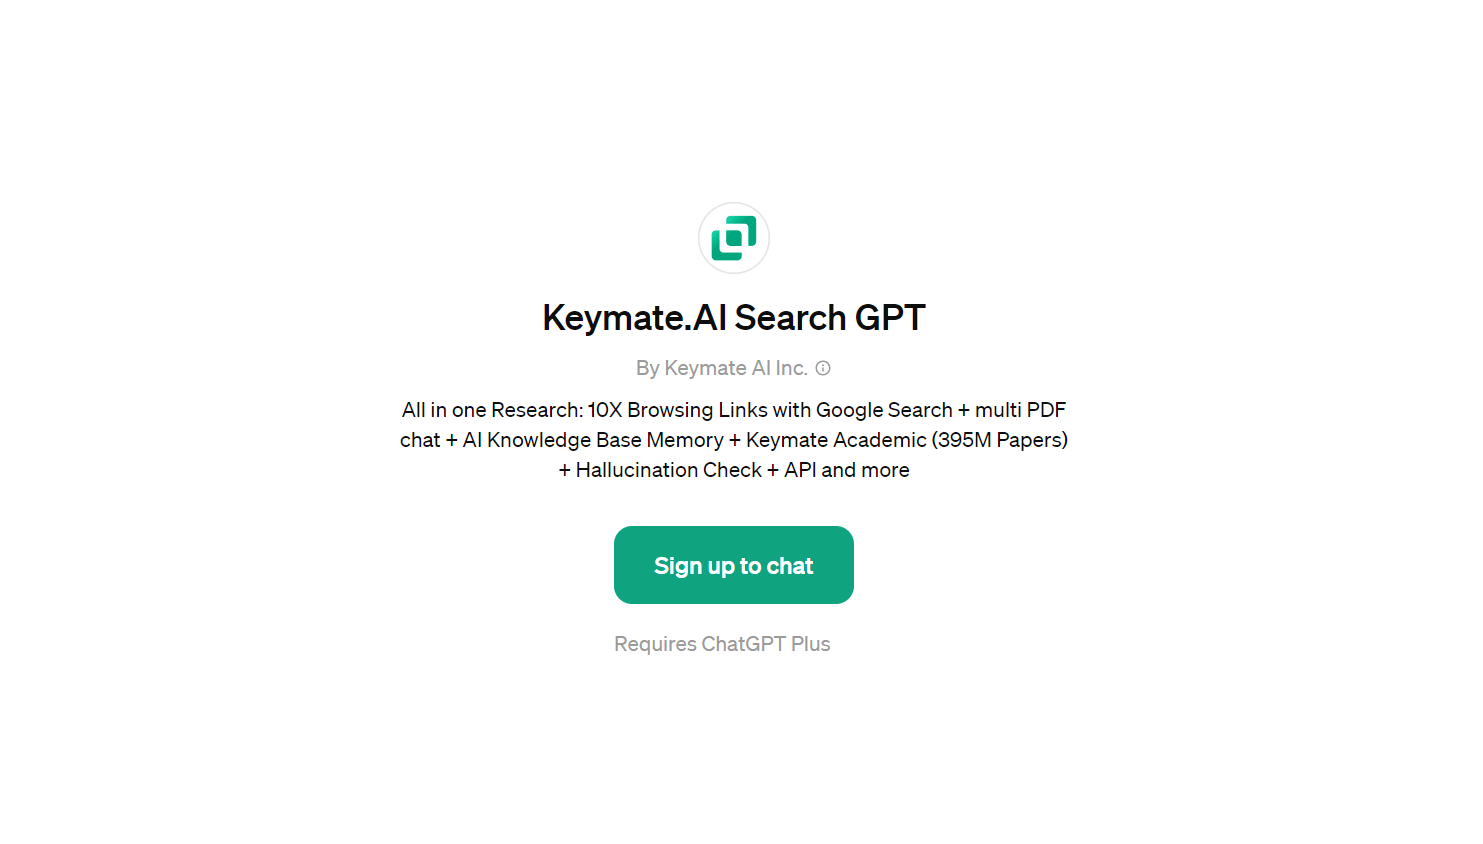 Keymate.AI Search GPT - Personal Search Assistant 